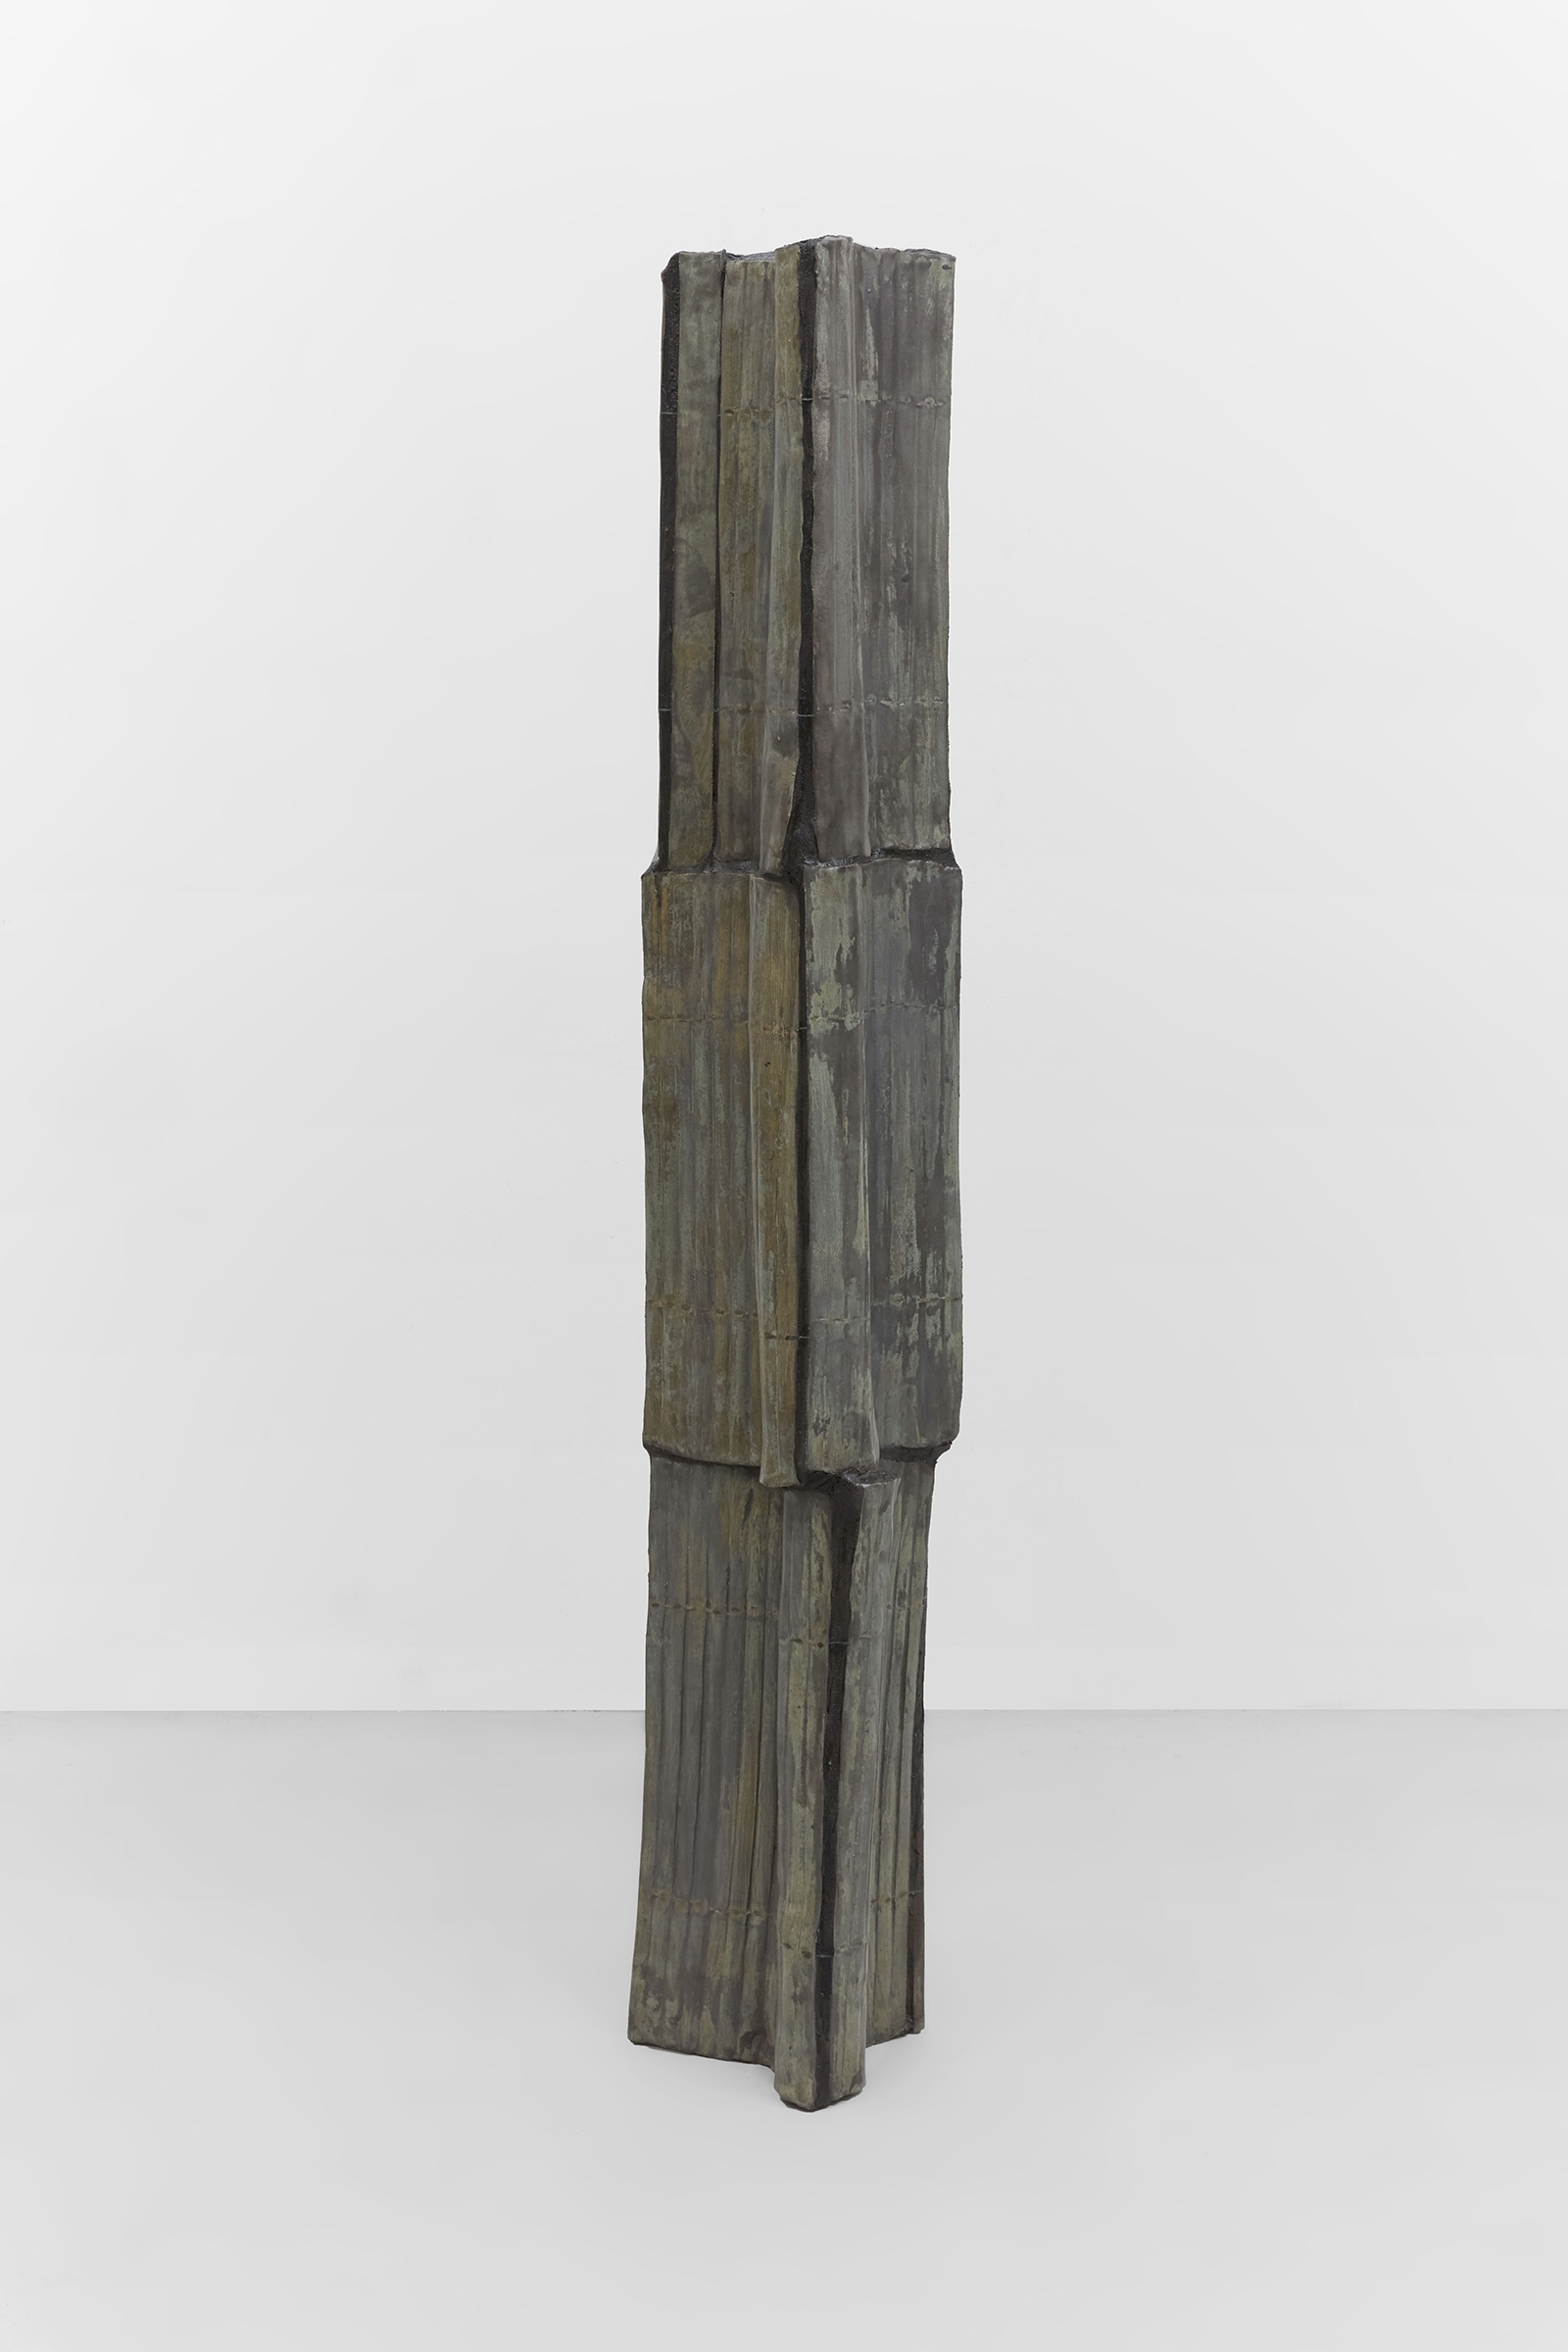 Anne Libby, Total Partial Annular, 2020, glazed ceramic, steel, sanded grout, 66h x 12w x 12d in.